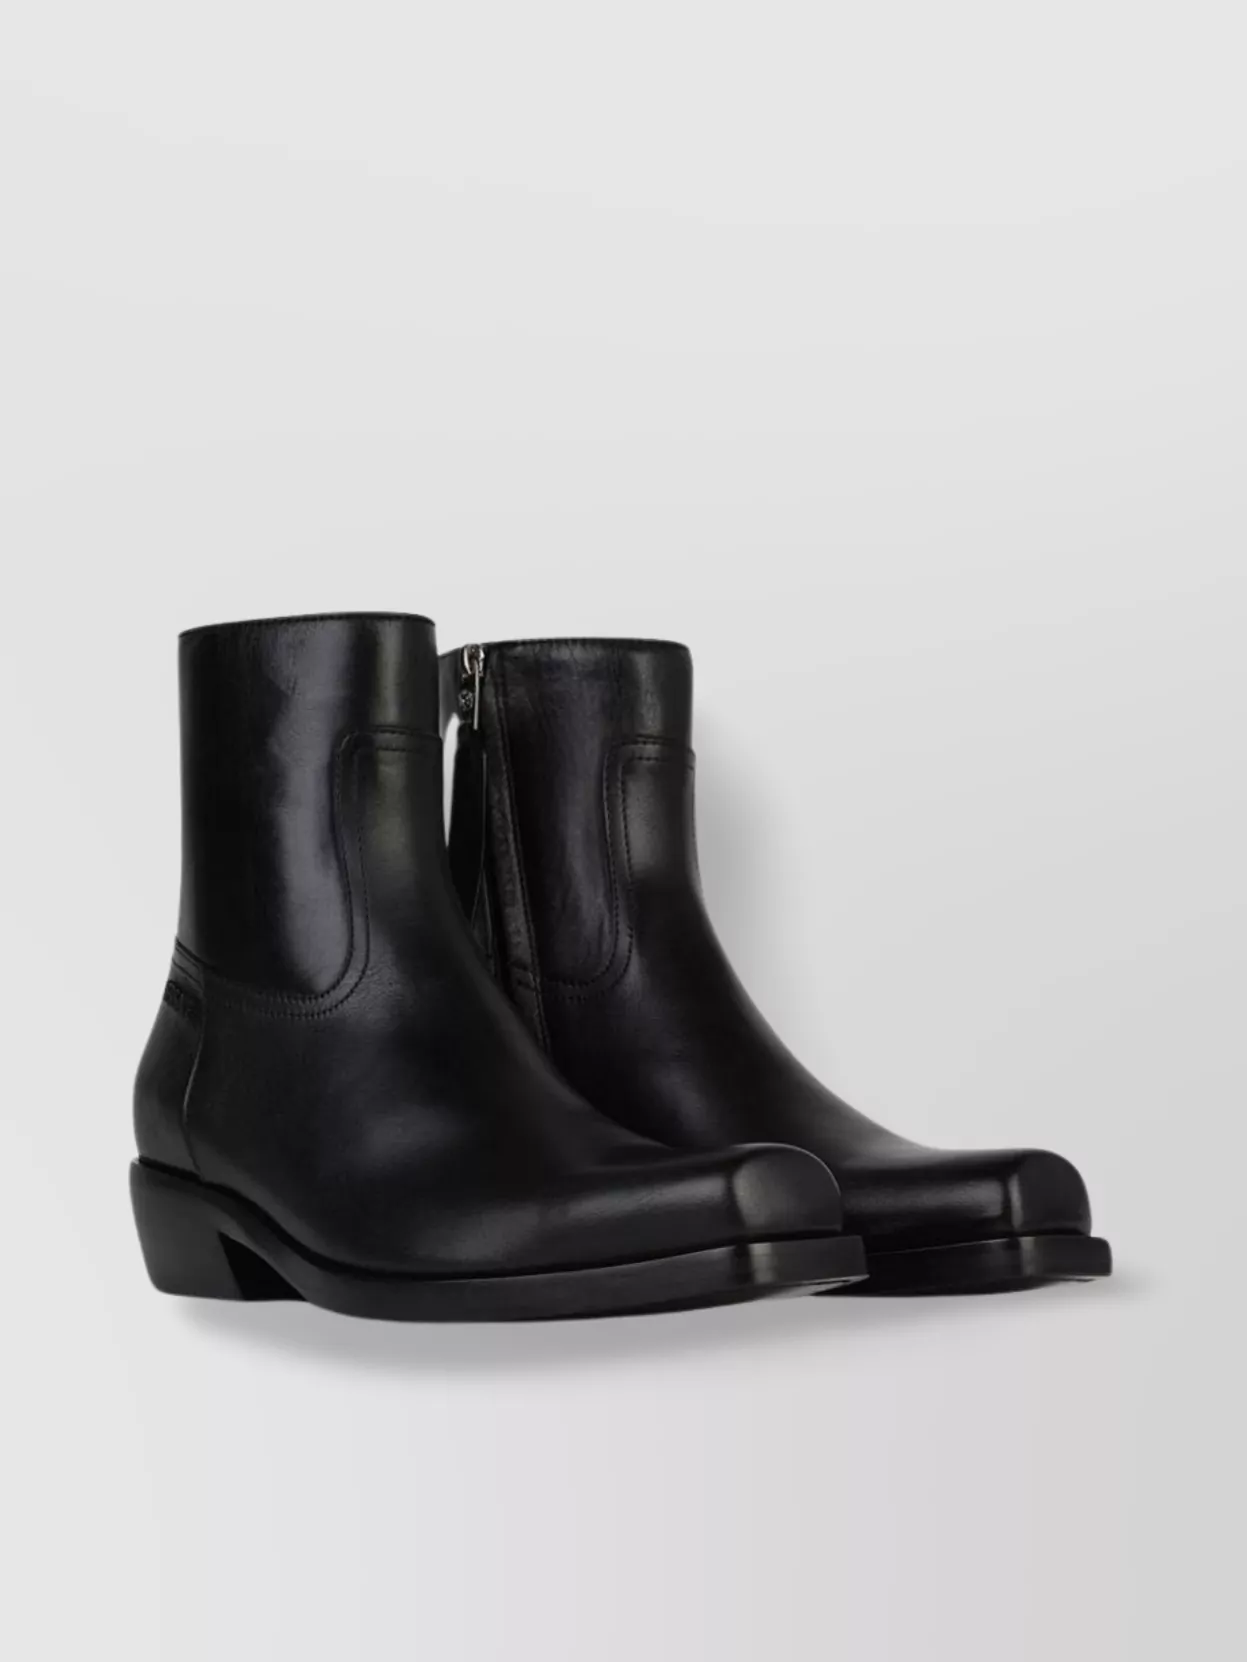 Versace Leather Ankle Boots Metallic Accent In Black